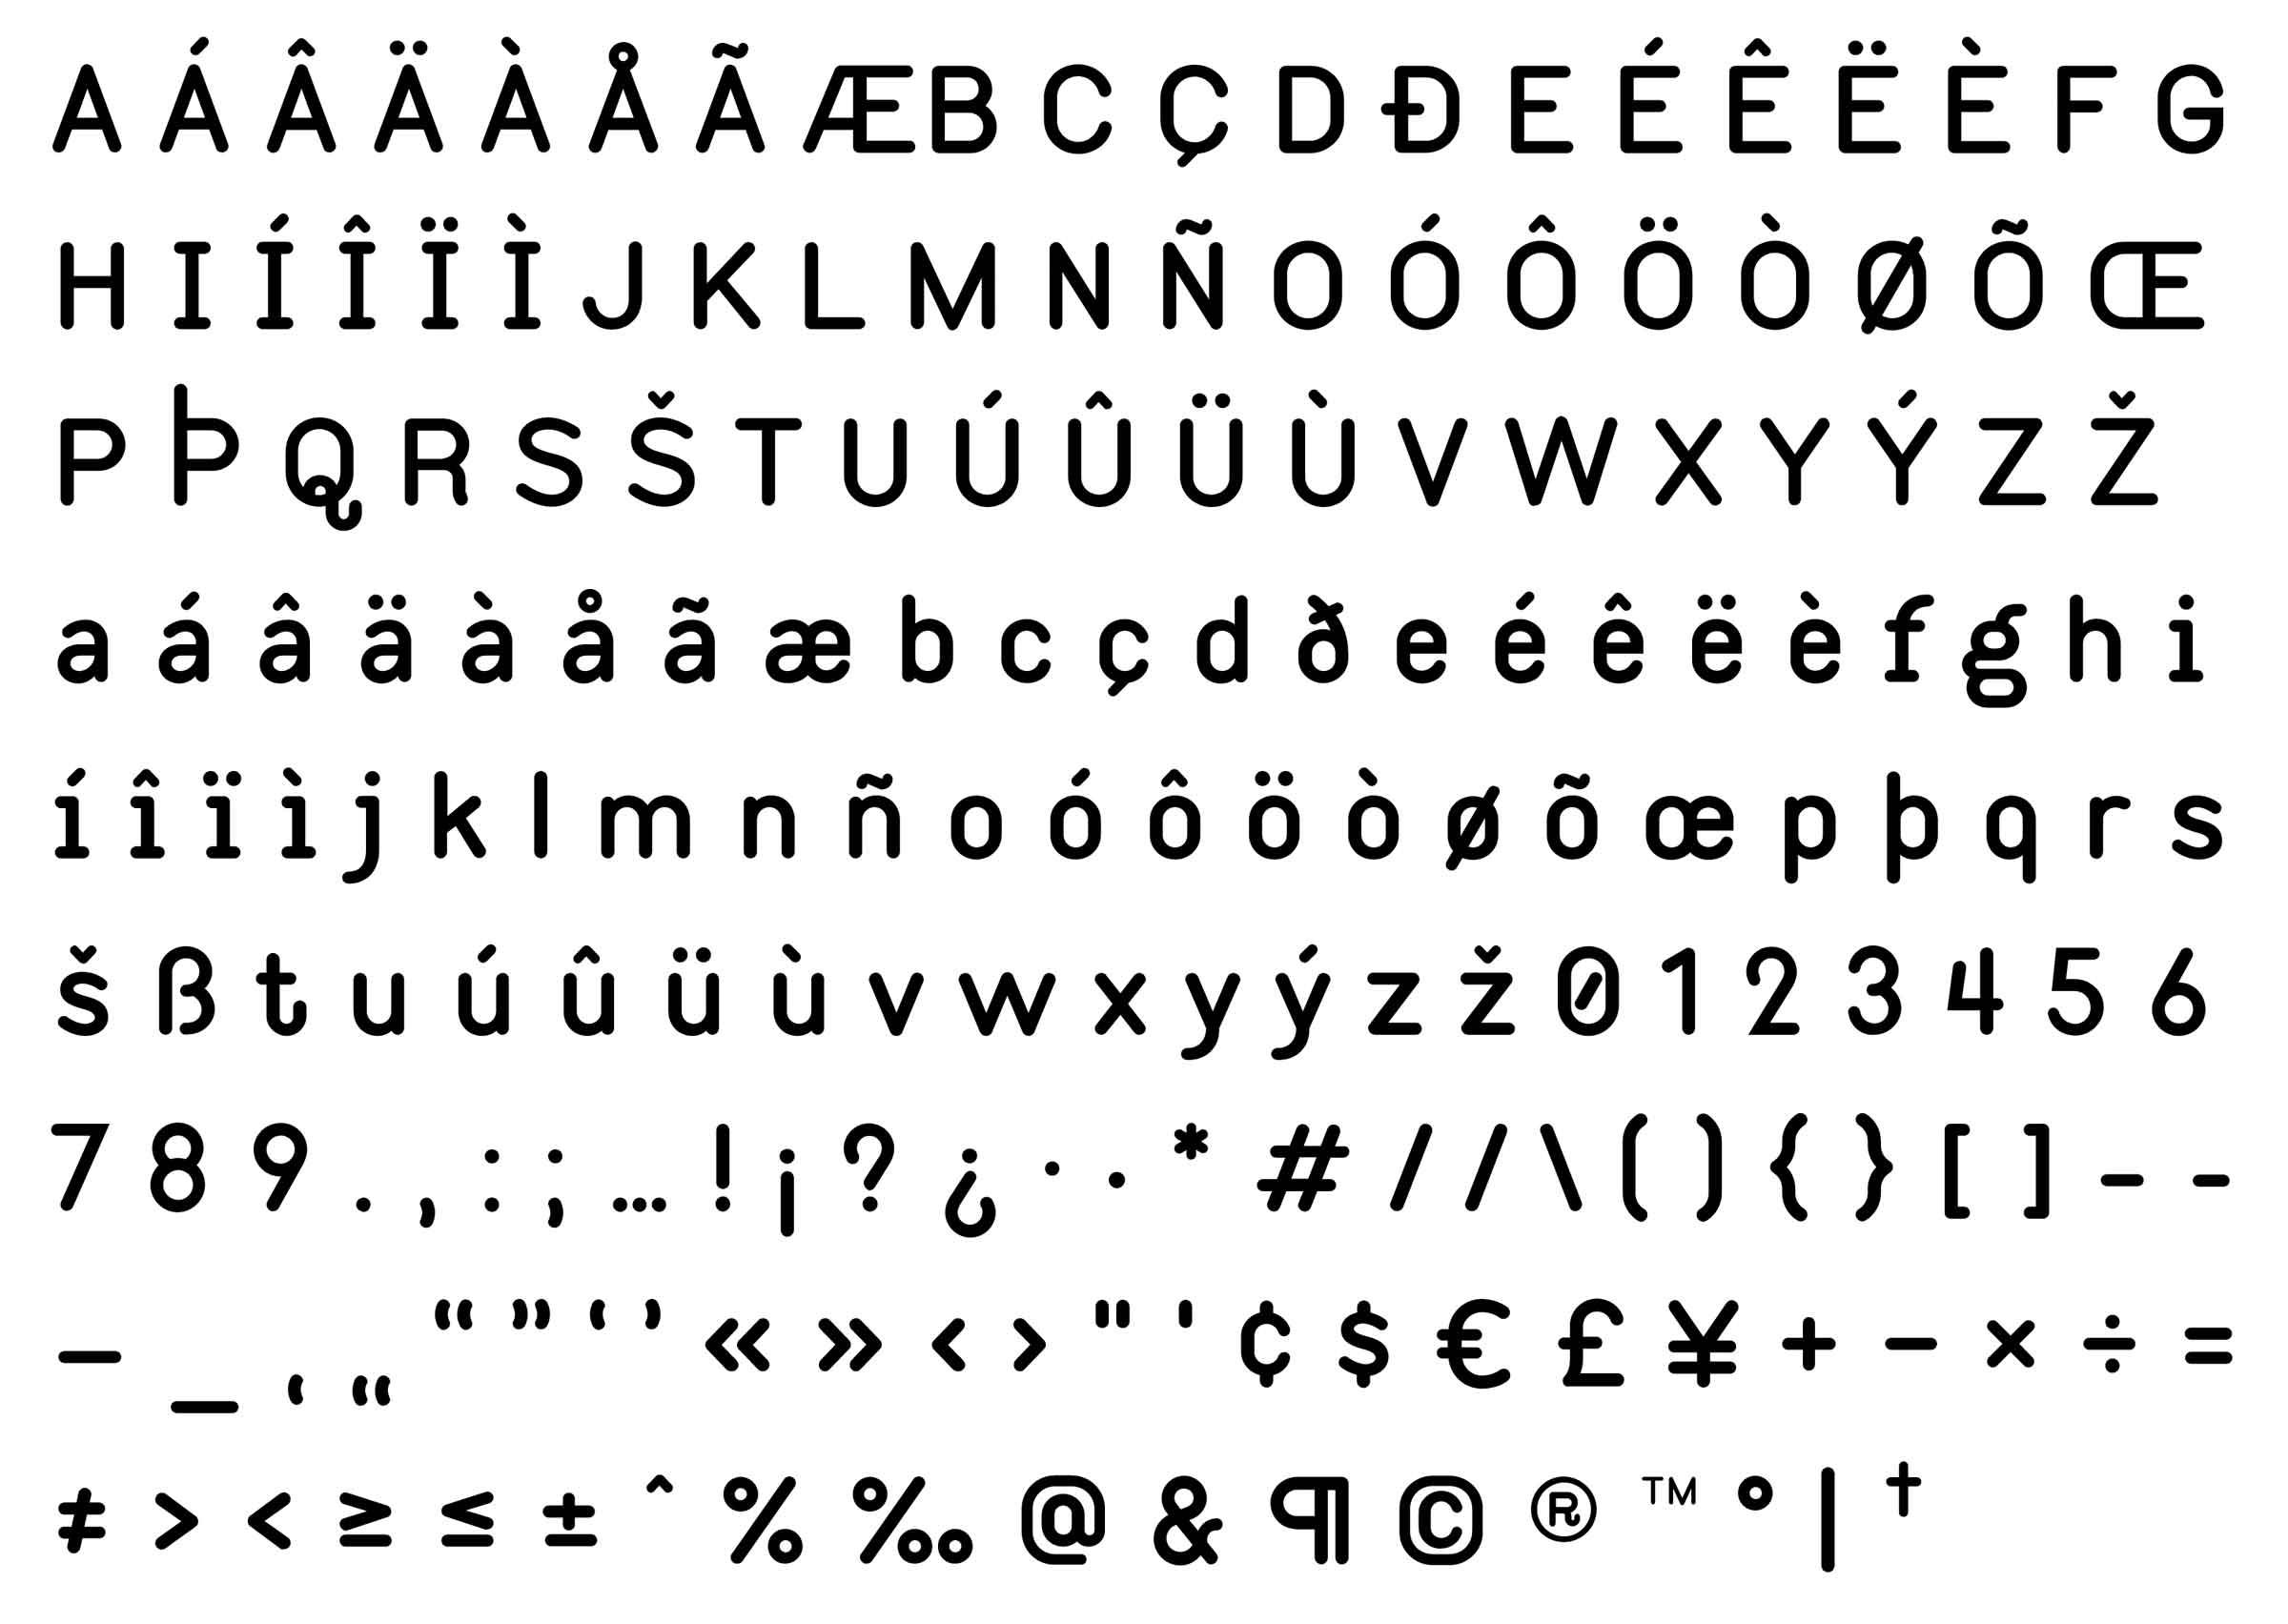 Deck Rounded type glyphset